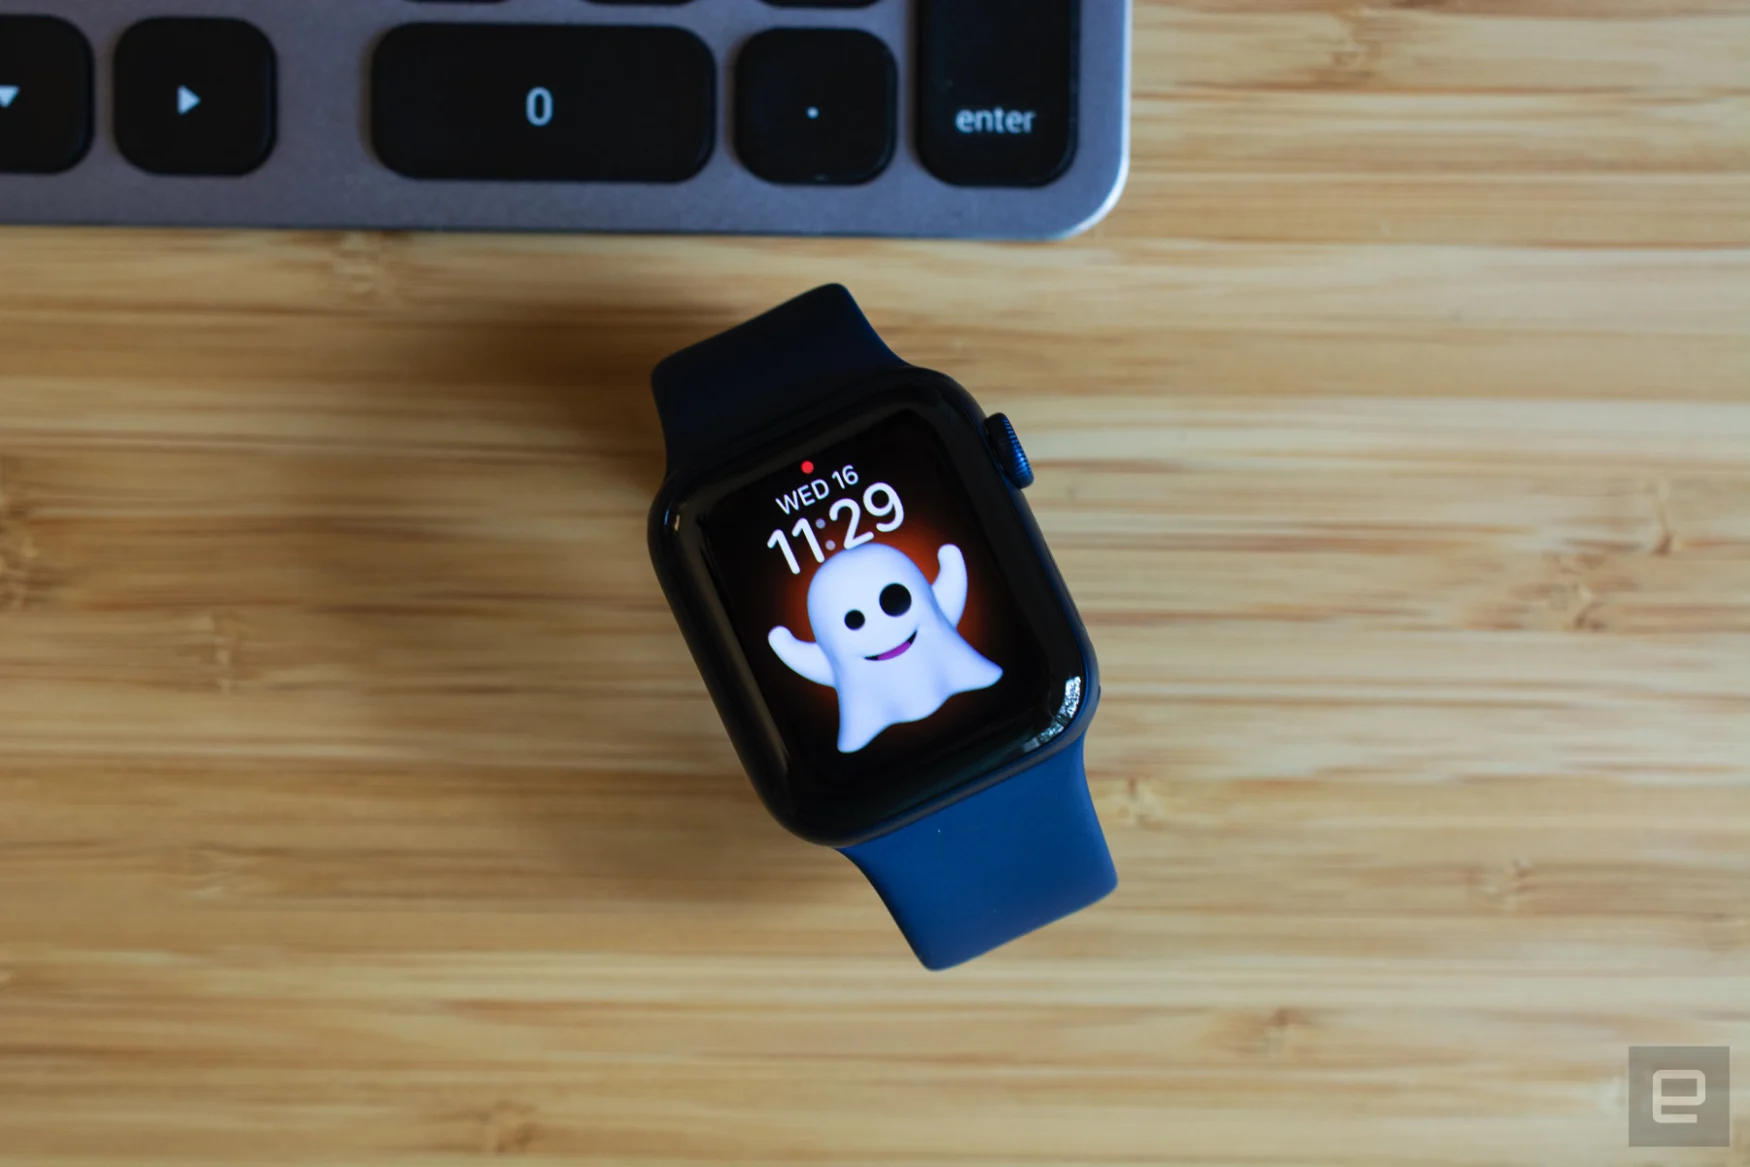 The Apple Watch Series 6 with a Memoji watch face sitting on a wooden table.